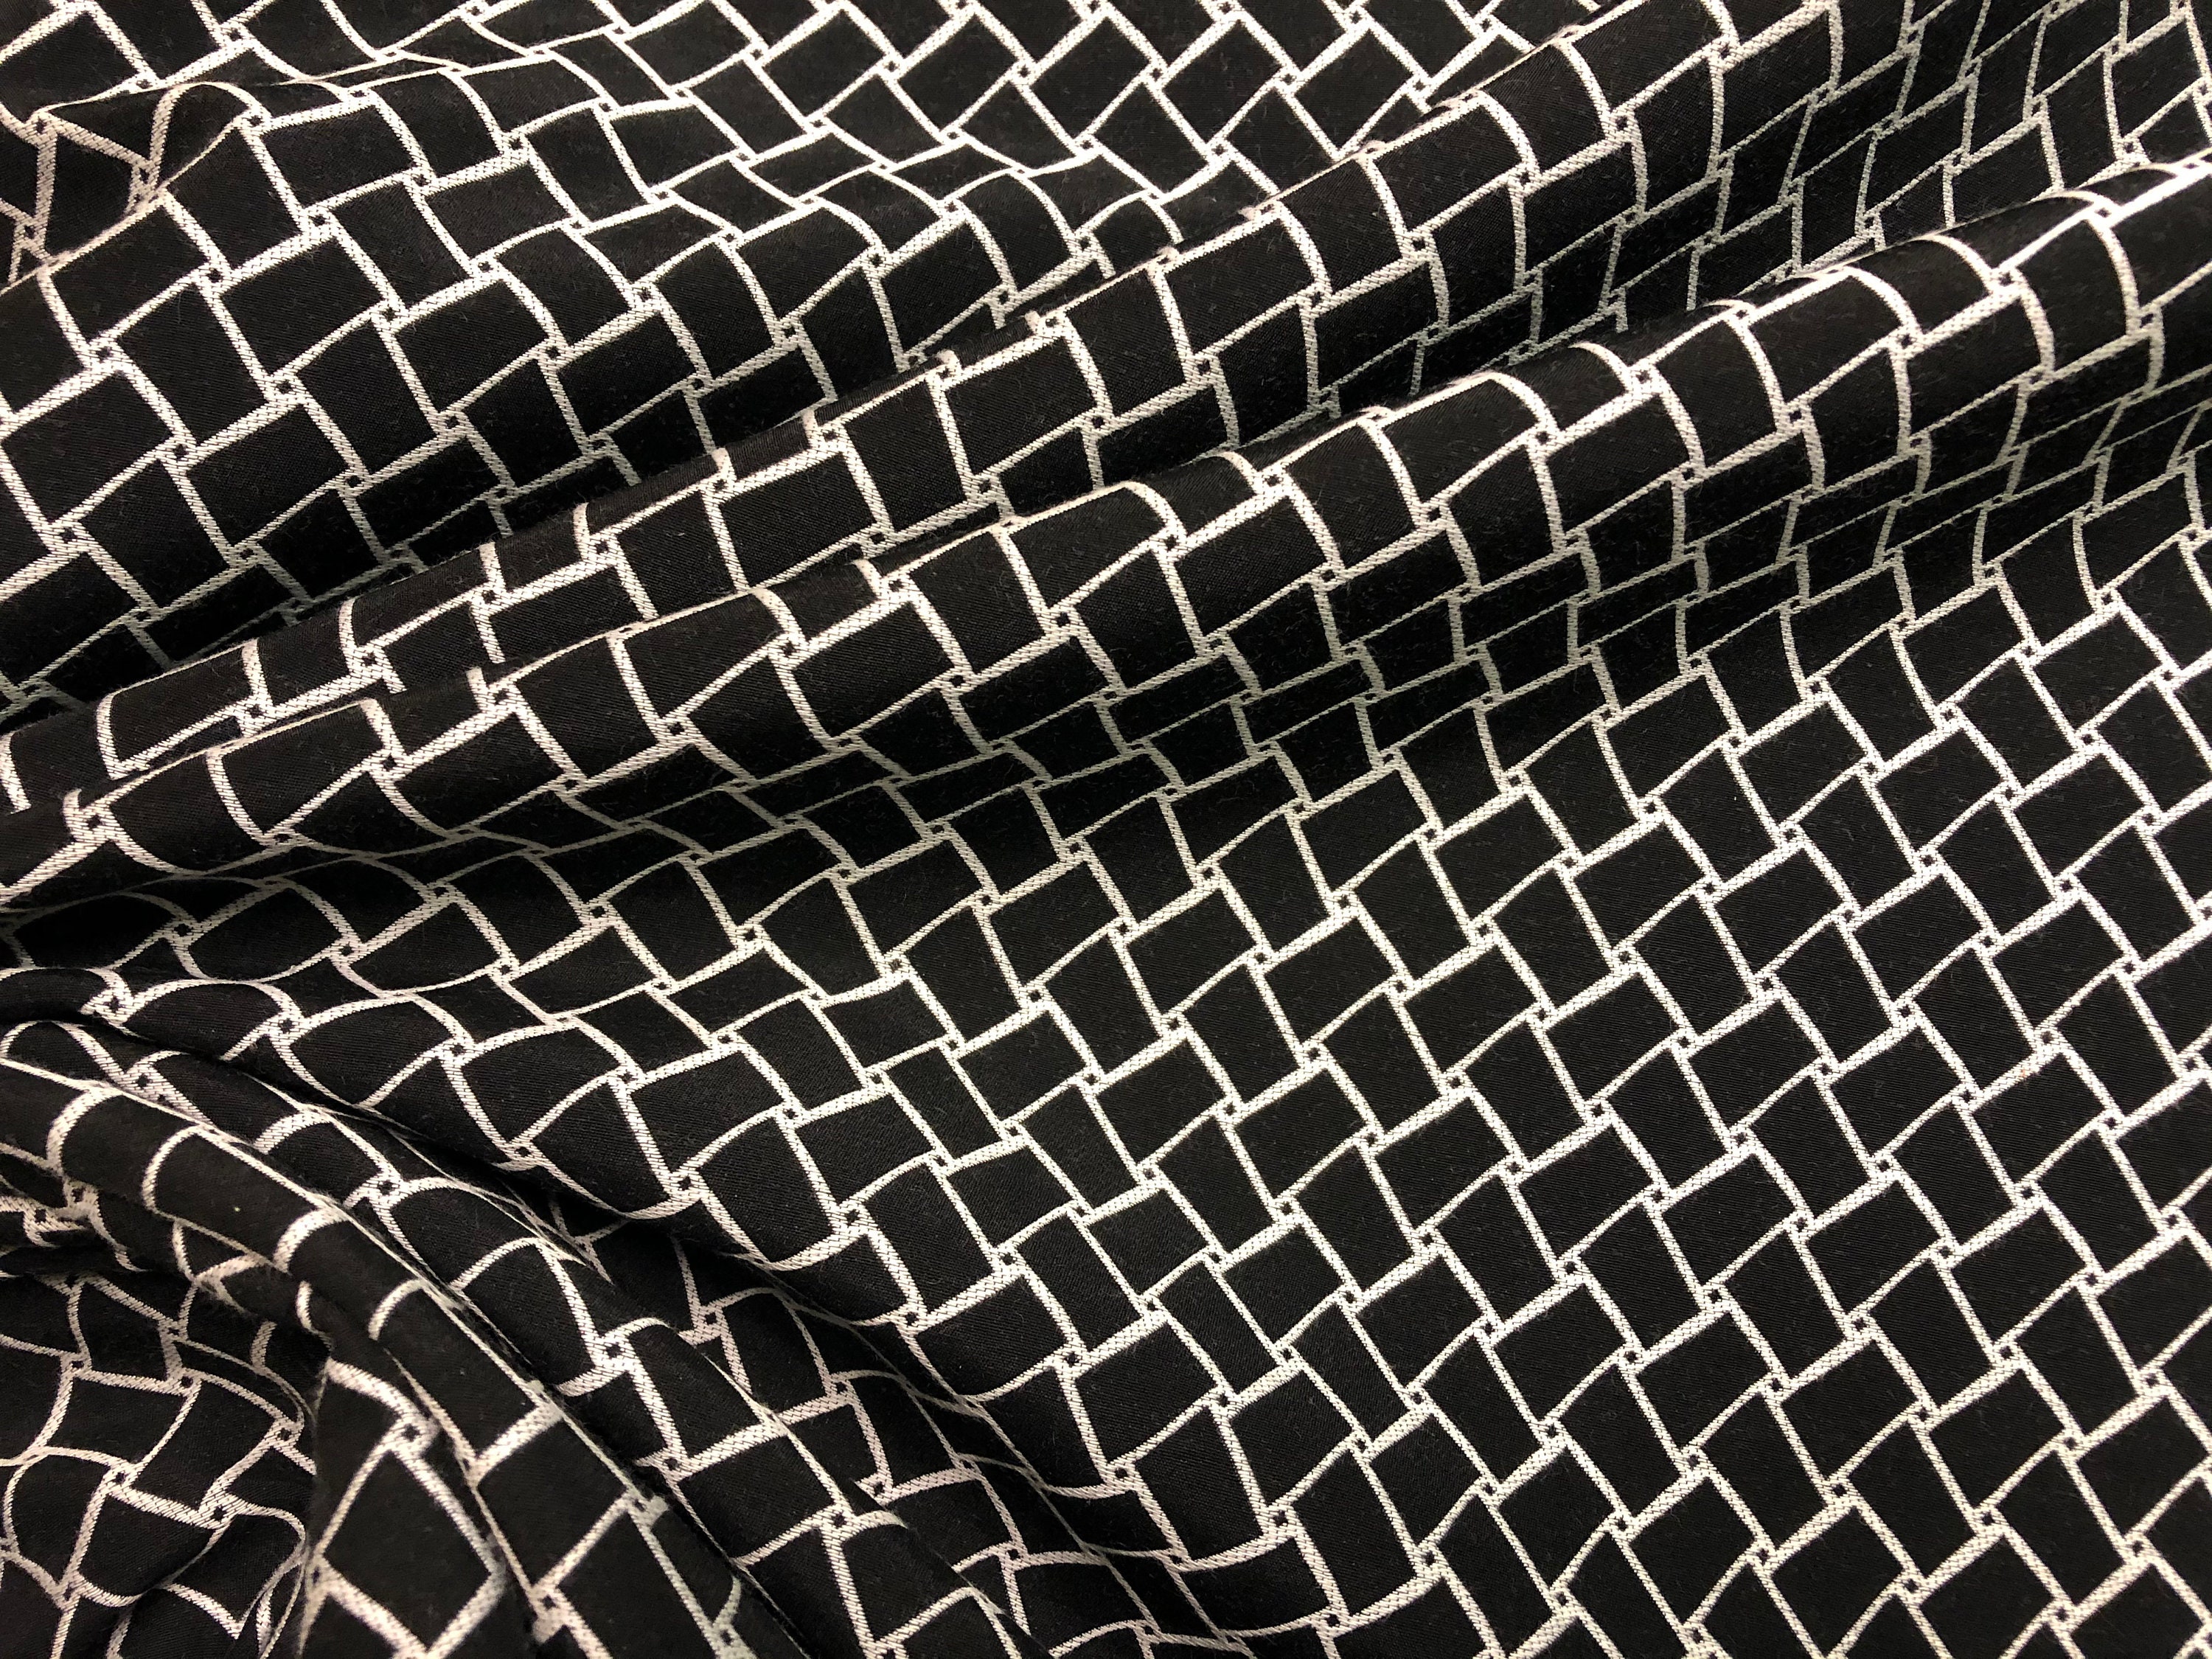 Suiting Wight Cotton Blend With Black & White Geometric Pattern, Price Is Per Yard, 60 Wide